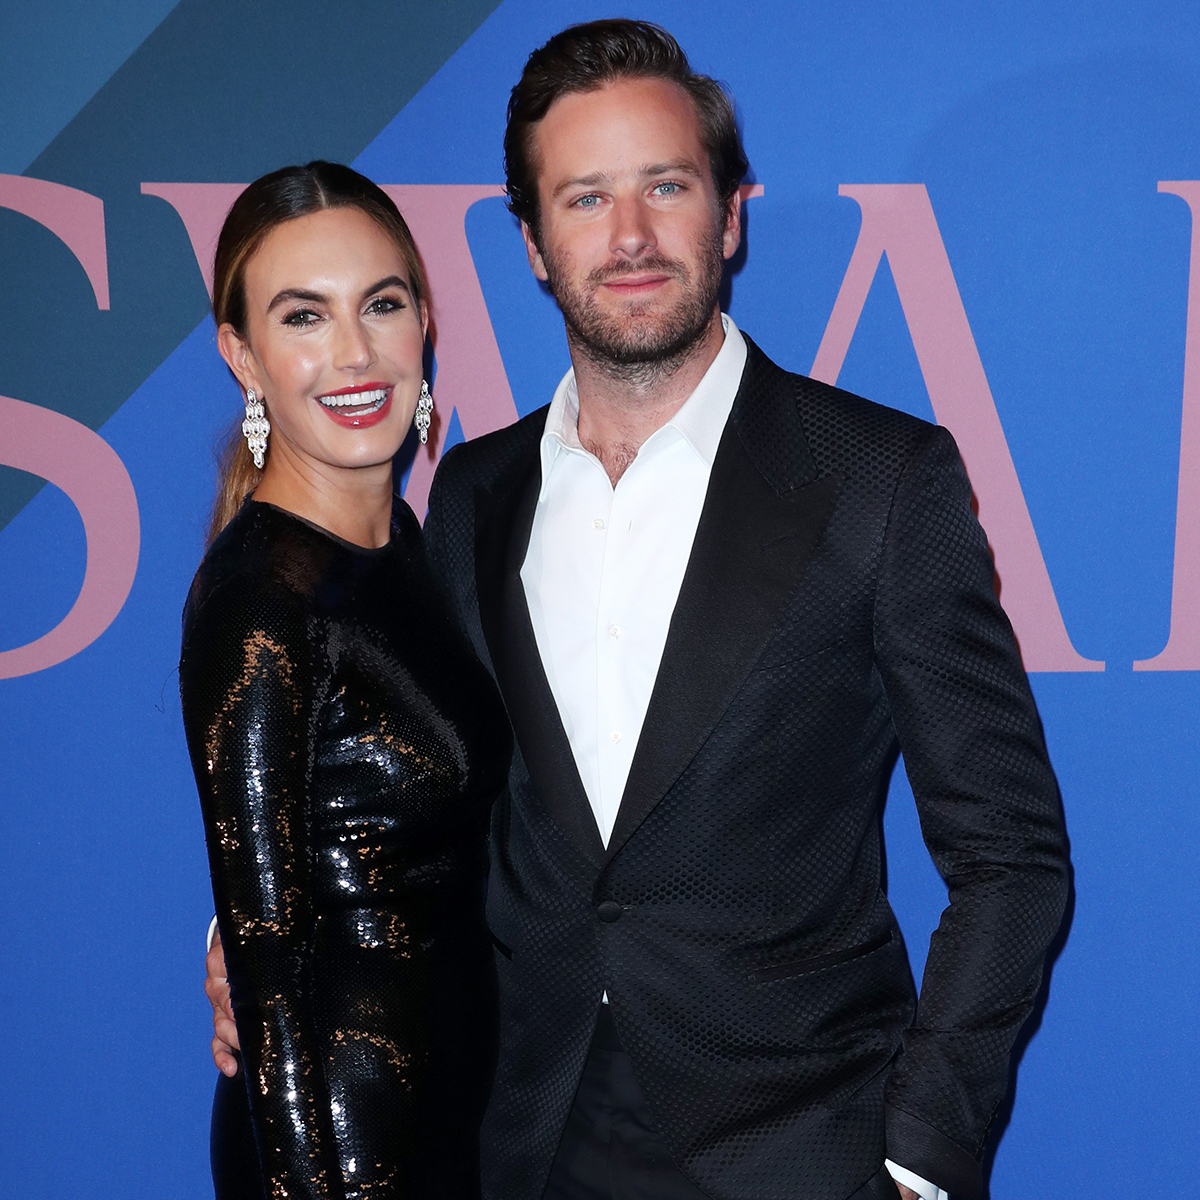 What led to the end of the marriage of Armie Hammer and Elizabeth Chambers